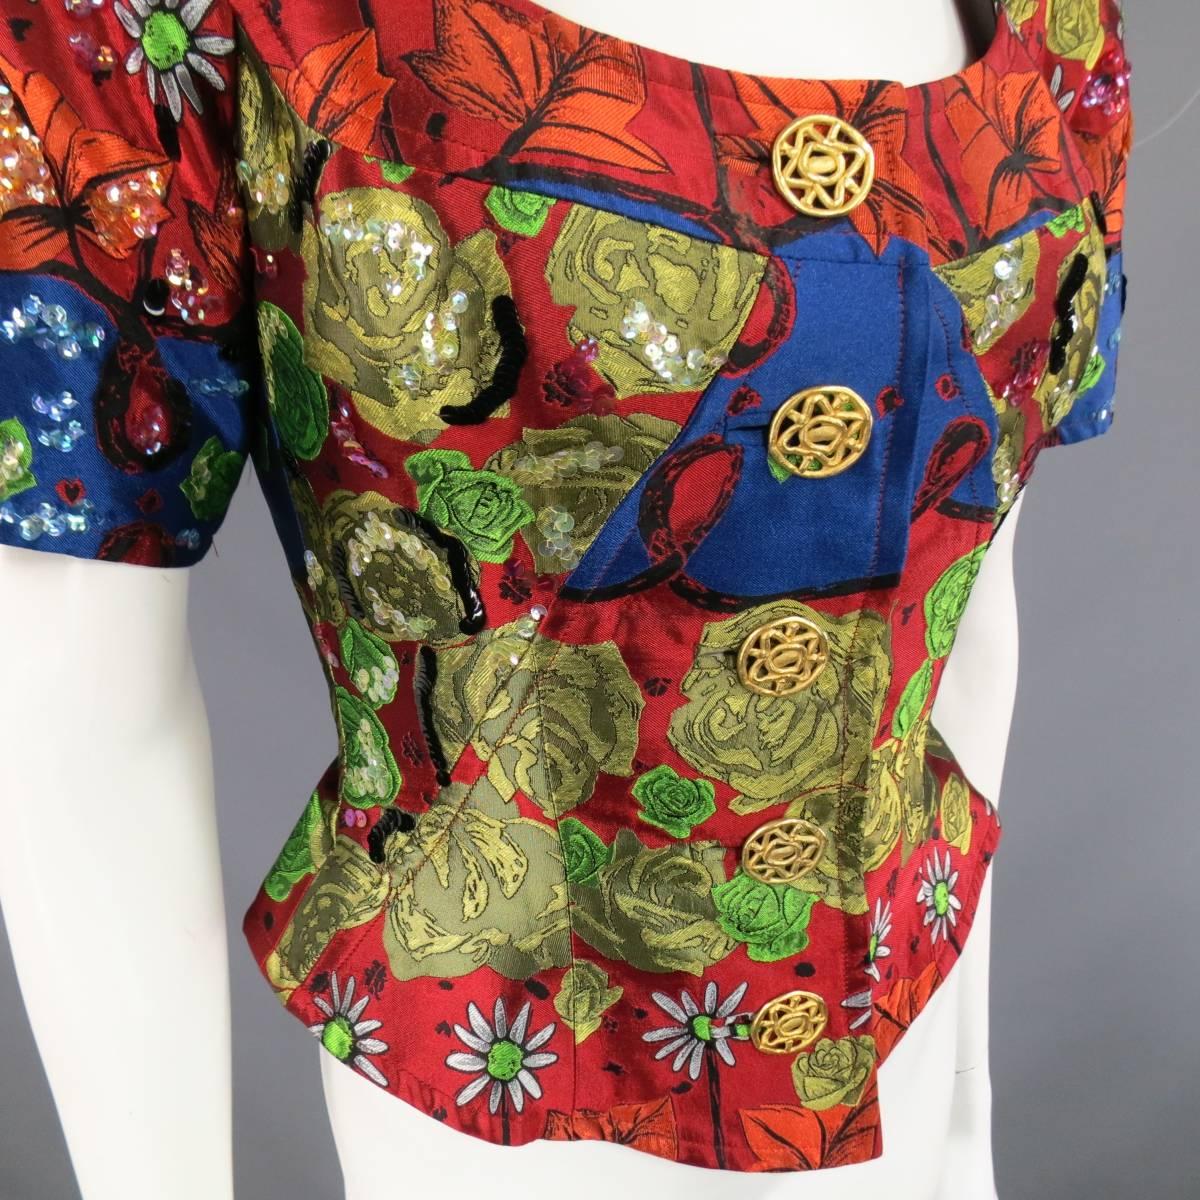 Women's CHRISTIAN LACROIX Red Gold Navy & Green Rose Floral Print Sequin Skirt Suit